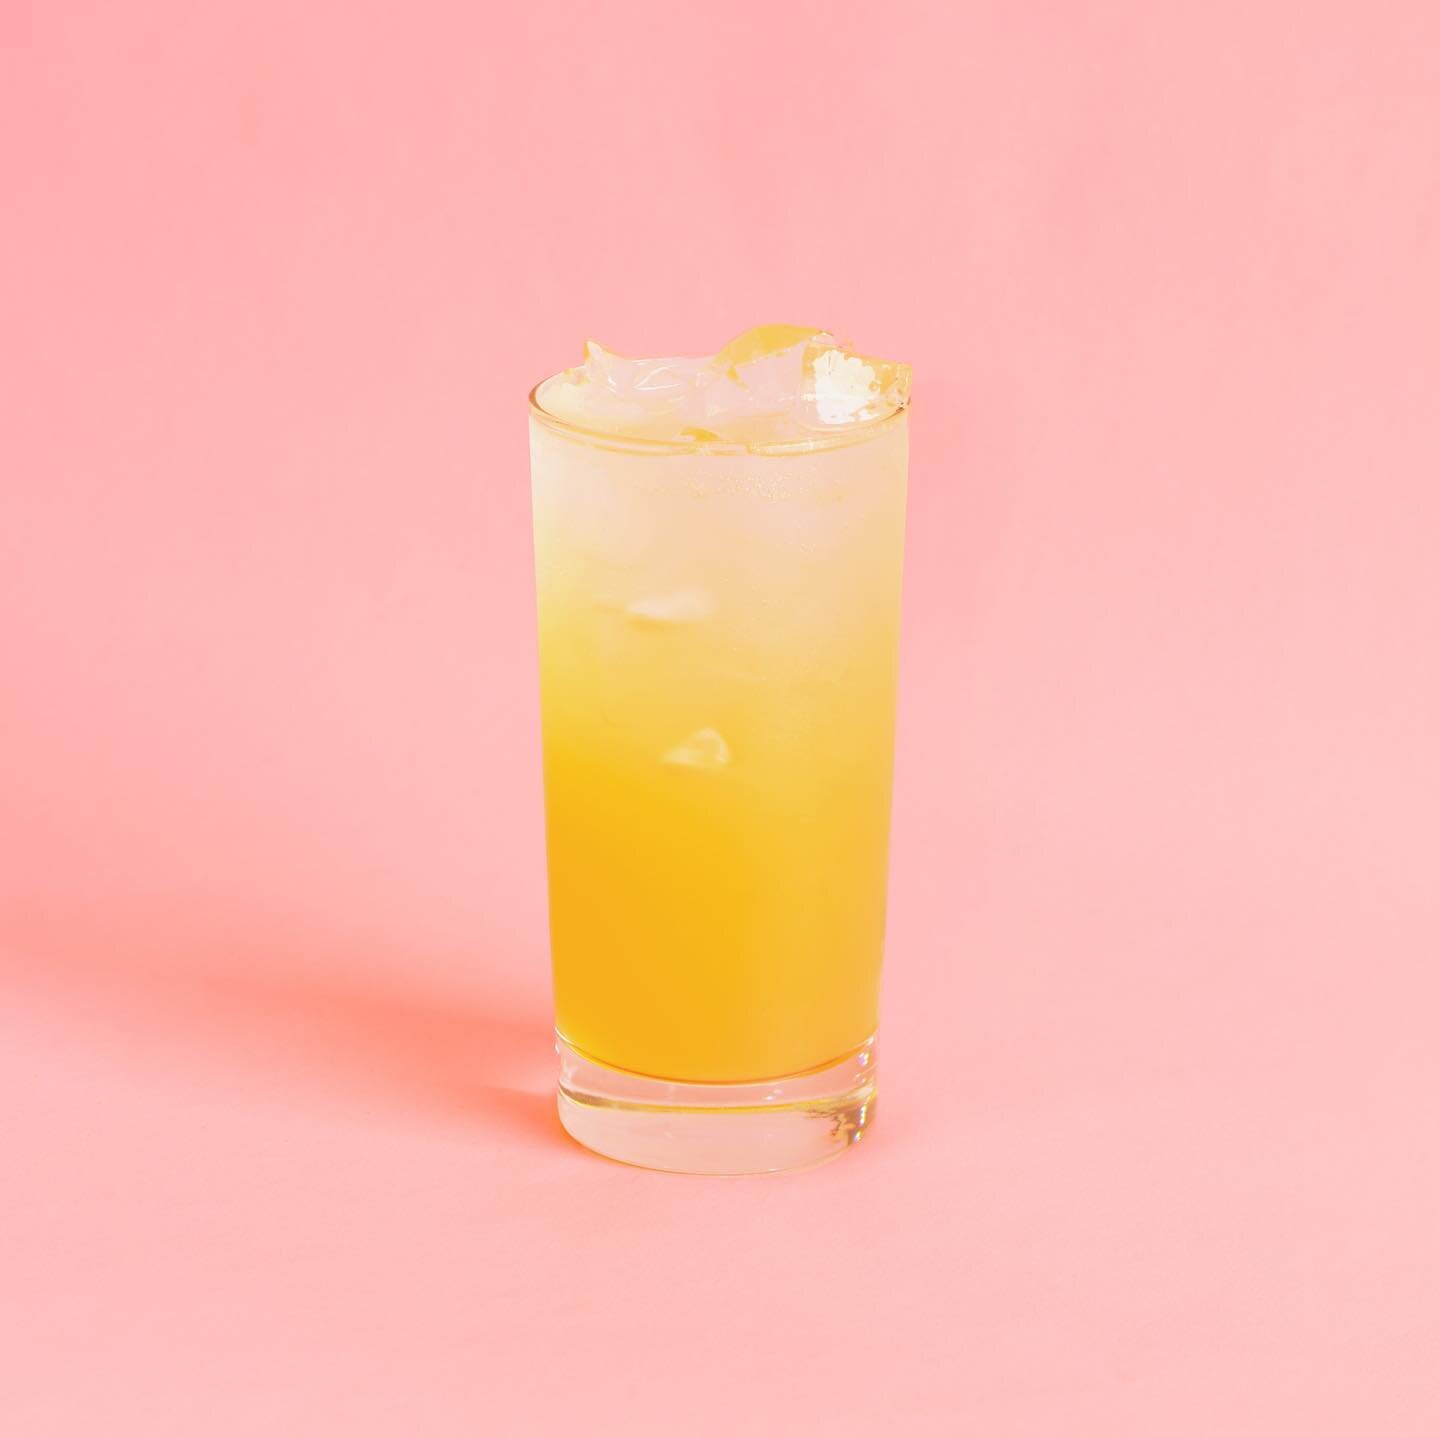 THE JOHN DALY - We start this drink by making an olio sacrum with our lemons. We squeeze those lemons and add them to a steeped GAO WEN black tea from our friends over at @hugoteaco . Once everything has combined, we take all of the liquid and clarif